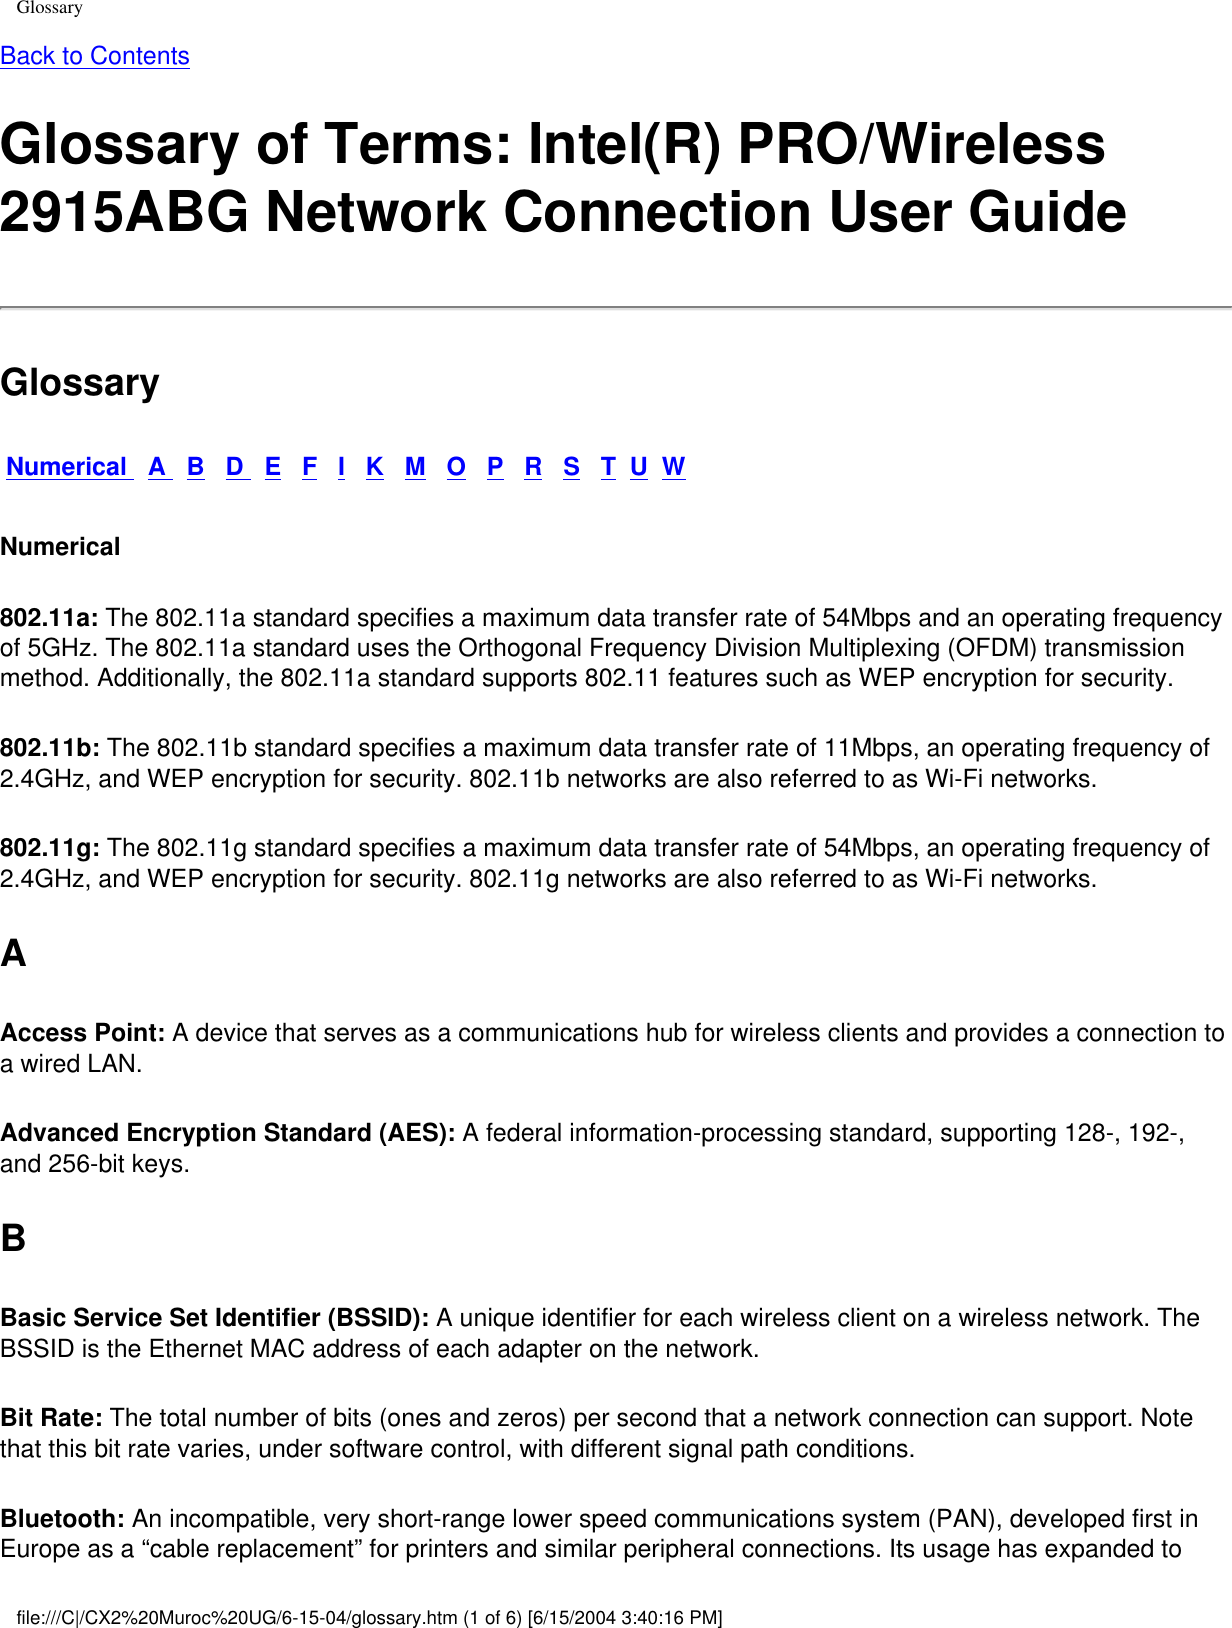 GlossaryBack to Contents Glossary of Terms: Intel(R) PRO/Wireless 2915ABG Network Connection User GuideGlossaryNumerical   A   B   D   E   F   I   K   M   O   P   R   S   T  U  WNumerical802.11a: The 802.11a standard specifies a maximum data transfer rate of 54Mbps and an operating frequency of 5GHz. The 802.11a standard uses the Orthogonal Frequency Division Multiplexing (OFDM) transmission method. Additionally, the 802.11a standard supports 802.11 features such as WEP encryption for security. 802.11b: The 802.11b standard specifies a maximum data transfer rate of 11Mbps, an operating frequency of 2.4GHz, and WEP encryption for security. 802.11b networks are also referred to as Wi-Fi networks. 802.11g: The 802.11g standard specifies a maximum data transfer rate of 54Mbps, an operating frequency of 2.4GHz, and WEP encryption for security. 802.11g networks are also referred to as Wi-Fi networks. AAccess Point: A device that serves as a communications hub for wireless clients and provides a connection to a wired LAN. Advanced Encryption Standard (AES): A federal information-processing standard, supporting 128-, 192-, and 256-bit keys. BBasic Service Set Identifier (BSSID): A unique identifier for each wireless client on a wireless network. The BSSID is the Ethernet MAC address of each adapter on the network. Bit Rate: The total number of bits (ones and zeros) per second that a network connection can support. Note that this bit rate varies, under software control, with different signal path conditions. Bluetooth: An incompatible, very short-range lower speed communications system (PAN), developed first in Europe as a “cable replacement” for printers and similar peripheral connections. Its usage has expanded to file:///C|/CX2%20Muroc%20UG/6-15-04/glossary.htm (1 of 6) [6/15/2004 3:40:16 PM]